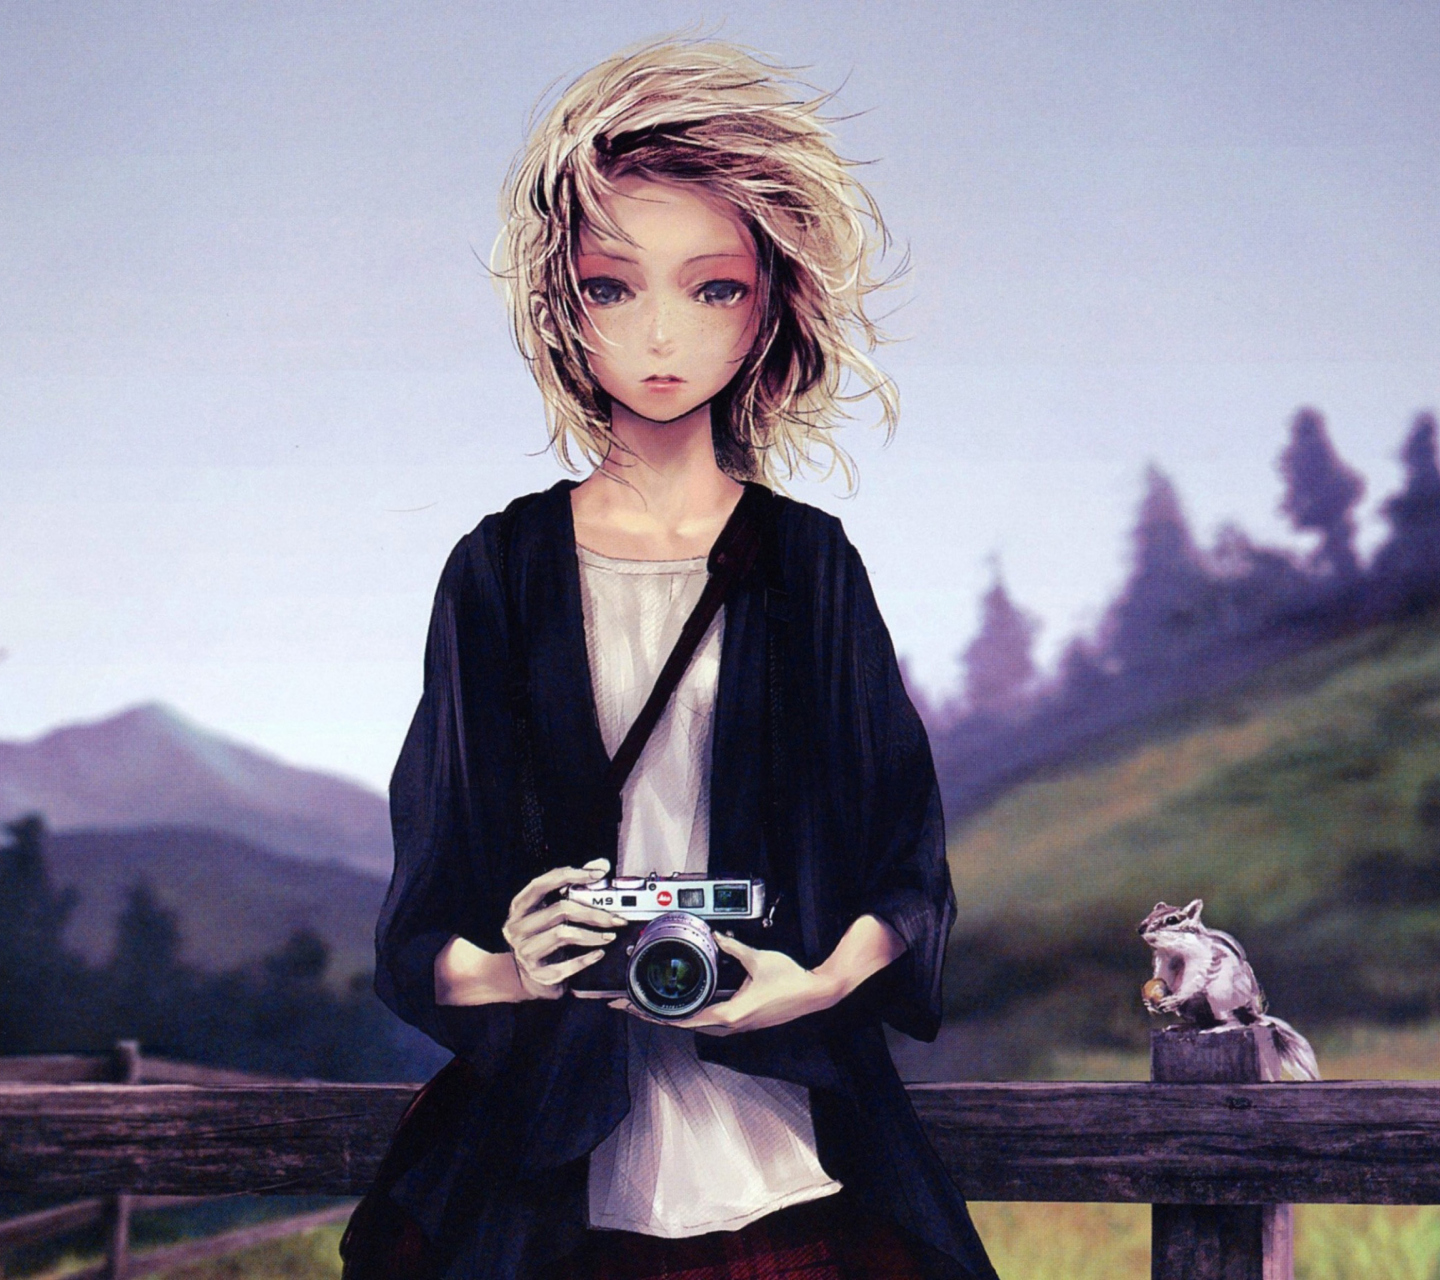 Girl With Photo Camera wallpaper 1440x1280